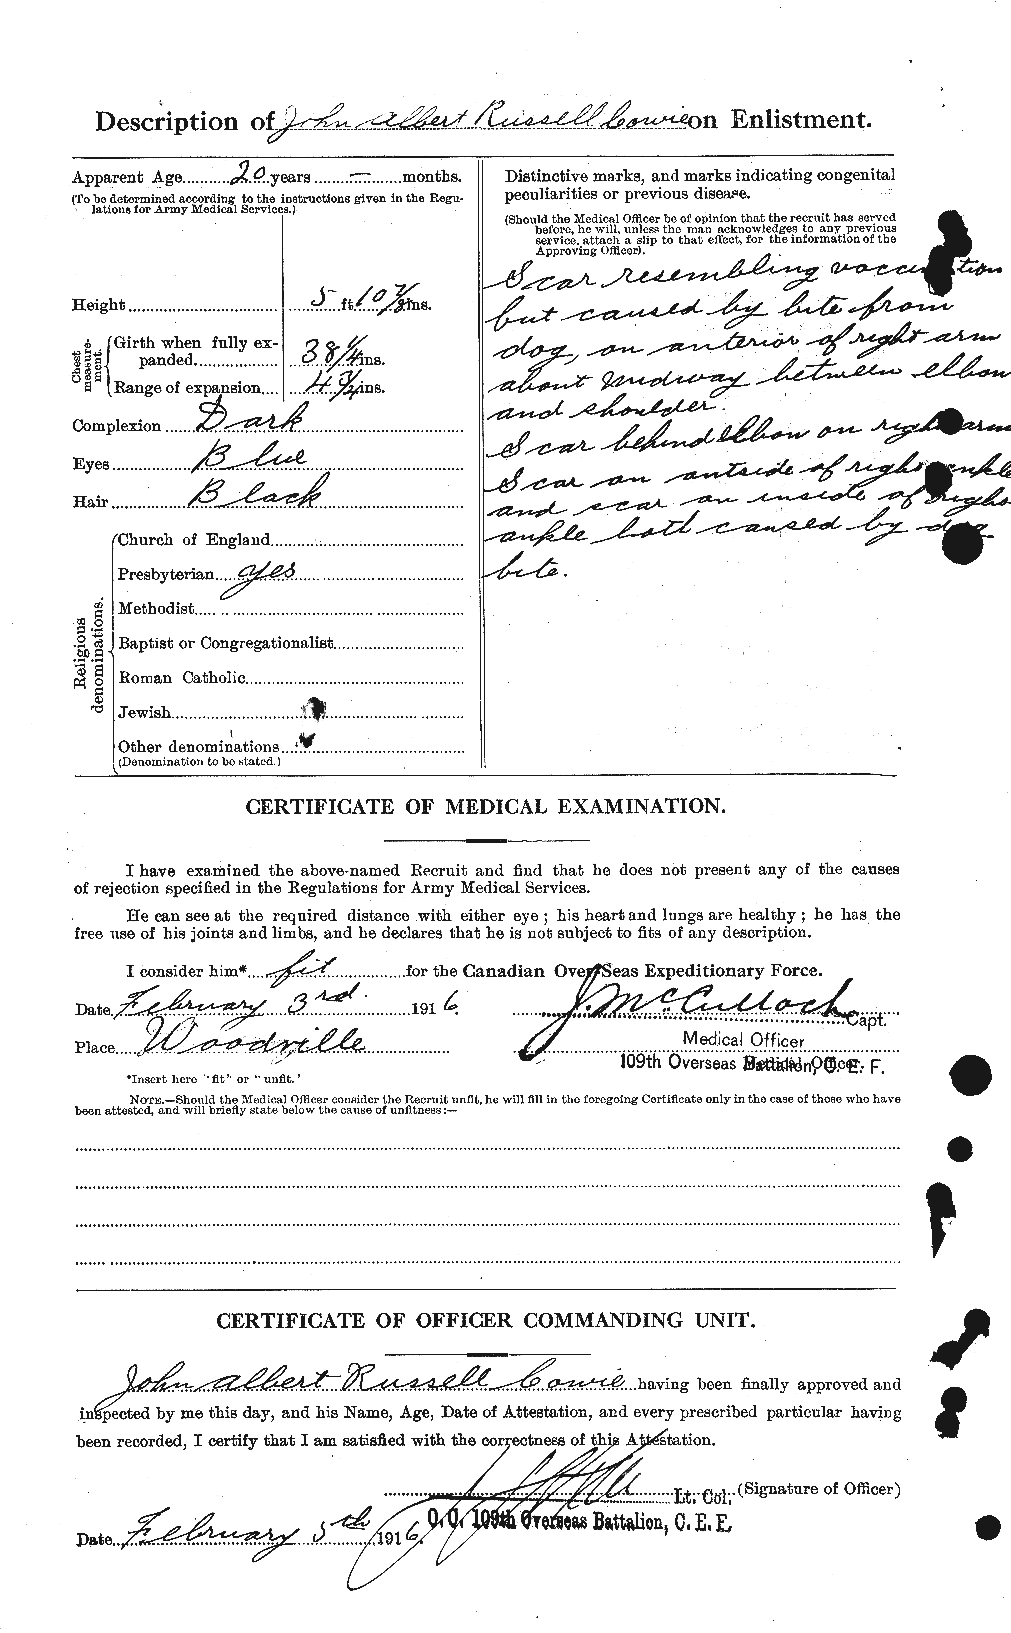 Personnel Records of the First World War - CEF 060006b